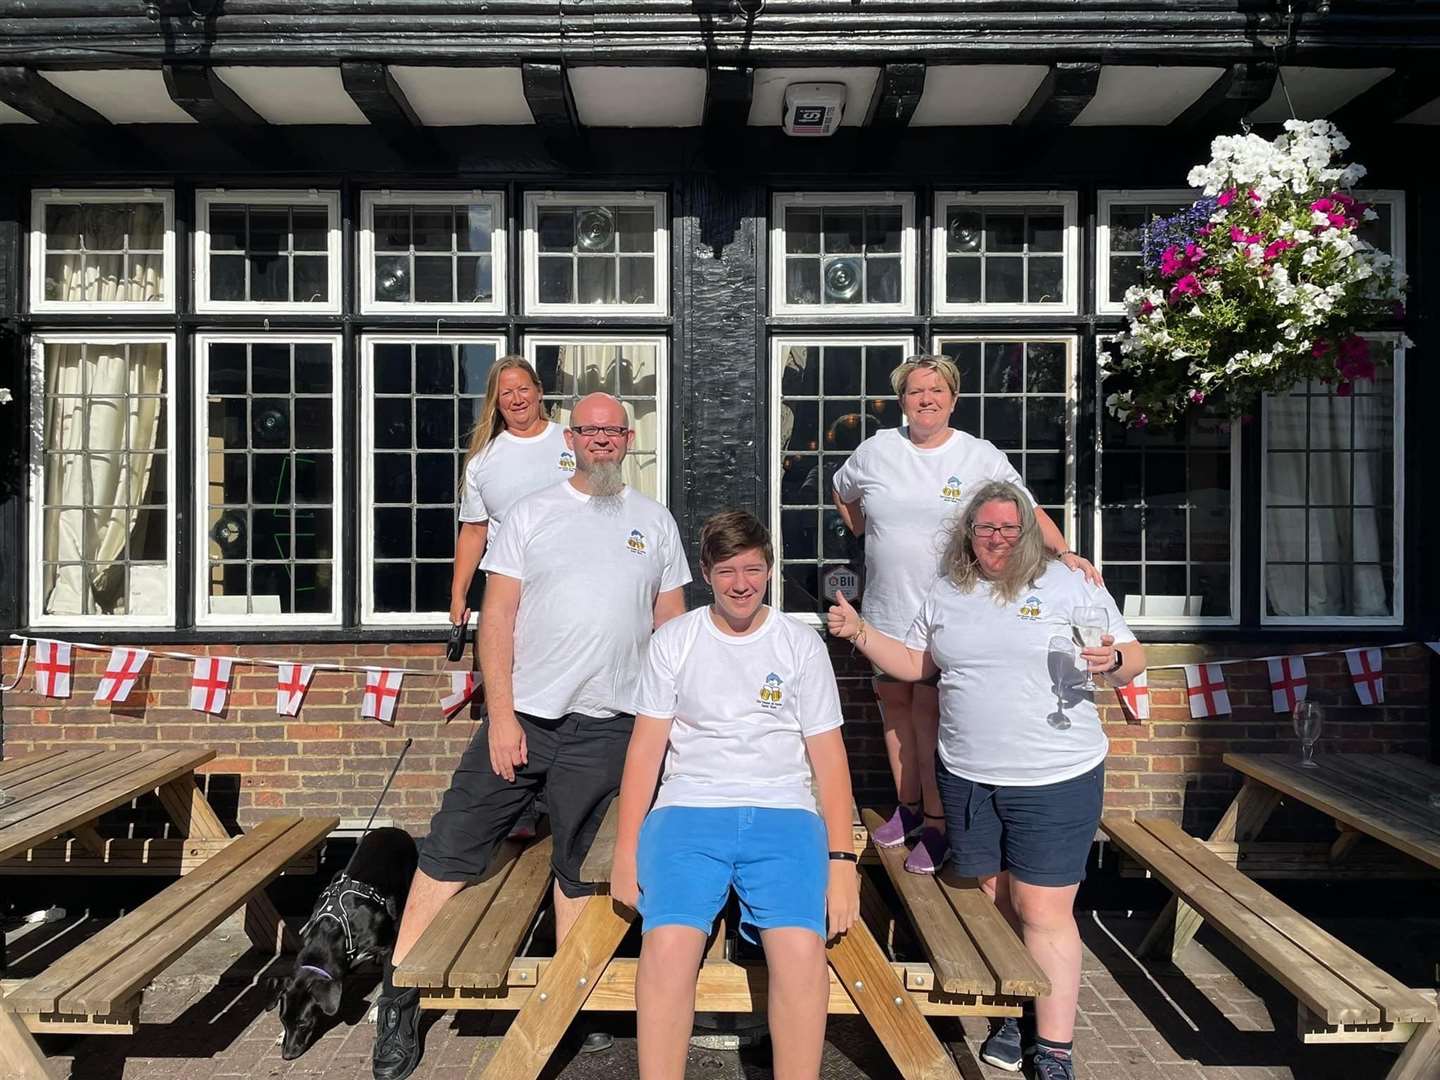 The Old House at Home pub swimming team, from Maidstone, will take on the challenge of swimming 22 miles over 12 weeks as part of the Aspire Channel Swim. Picture: Aspire